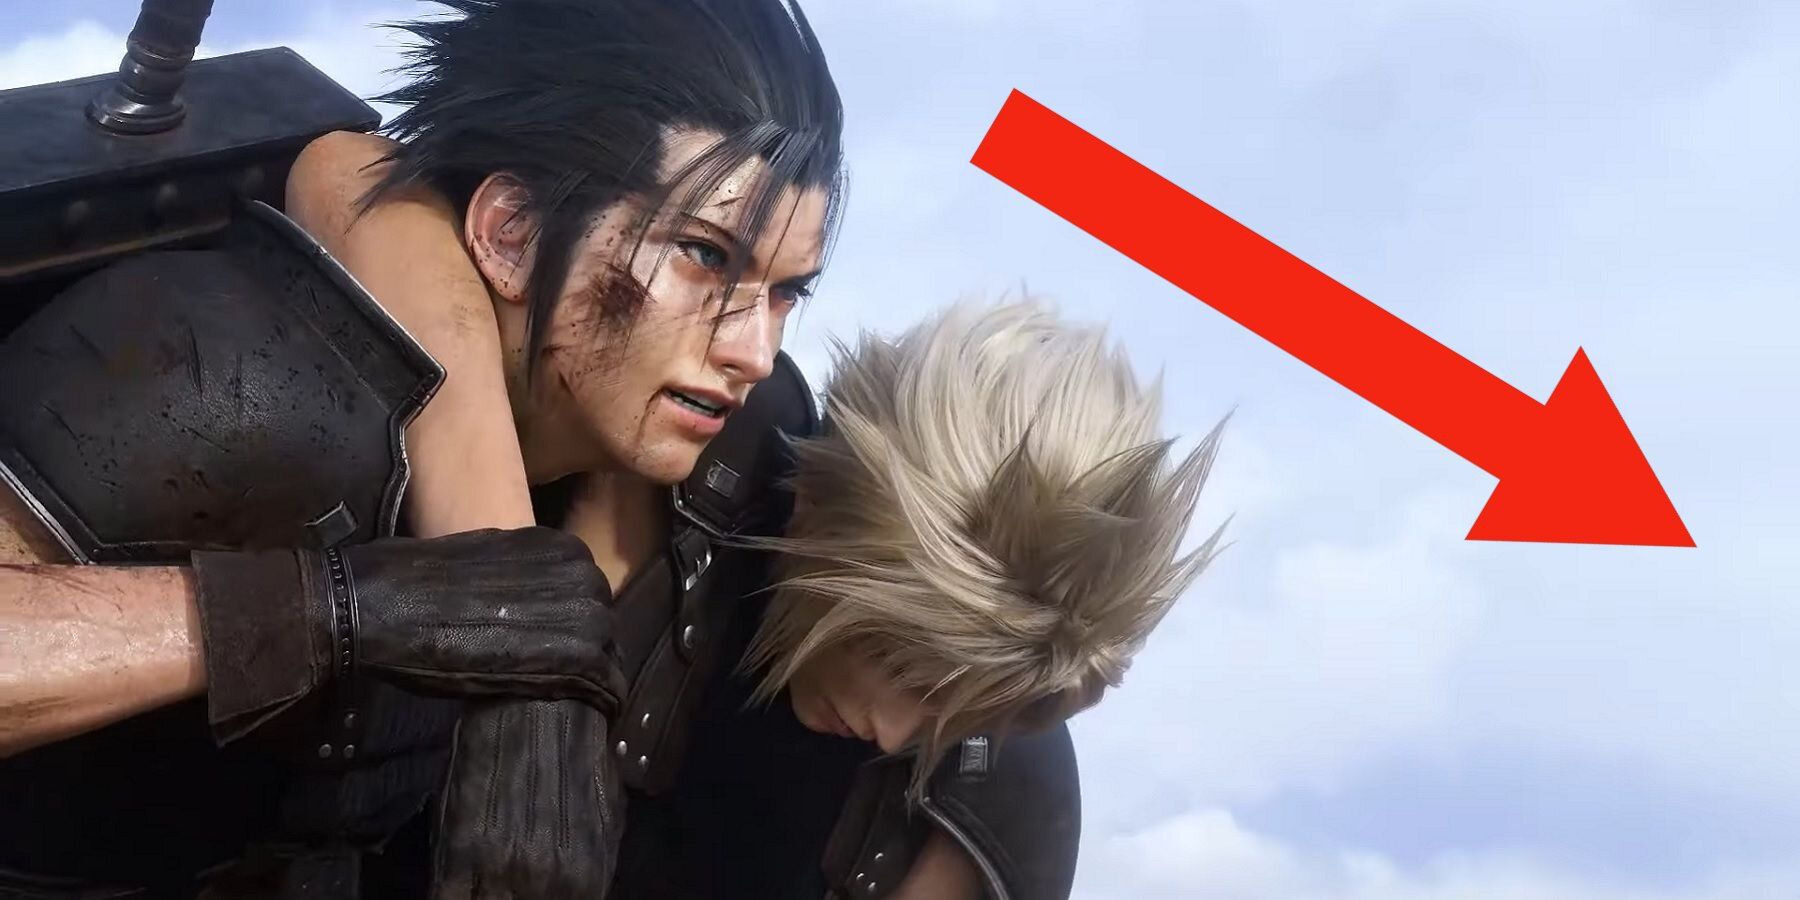 final fantasy 7 rebirth zack and cloud with red arrow